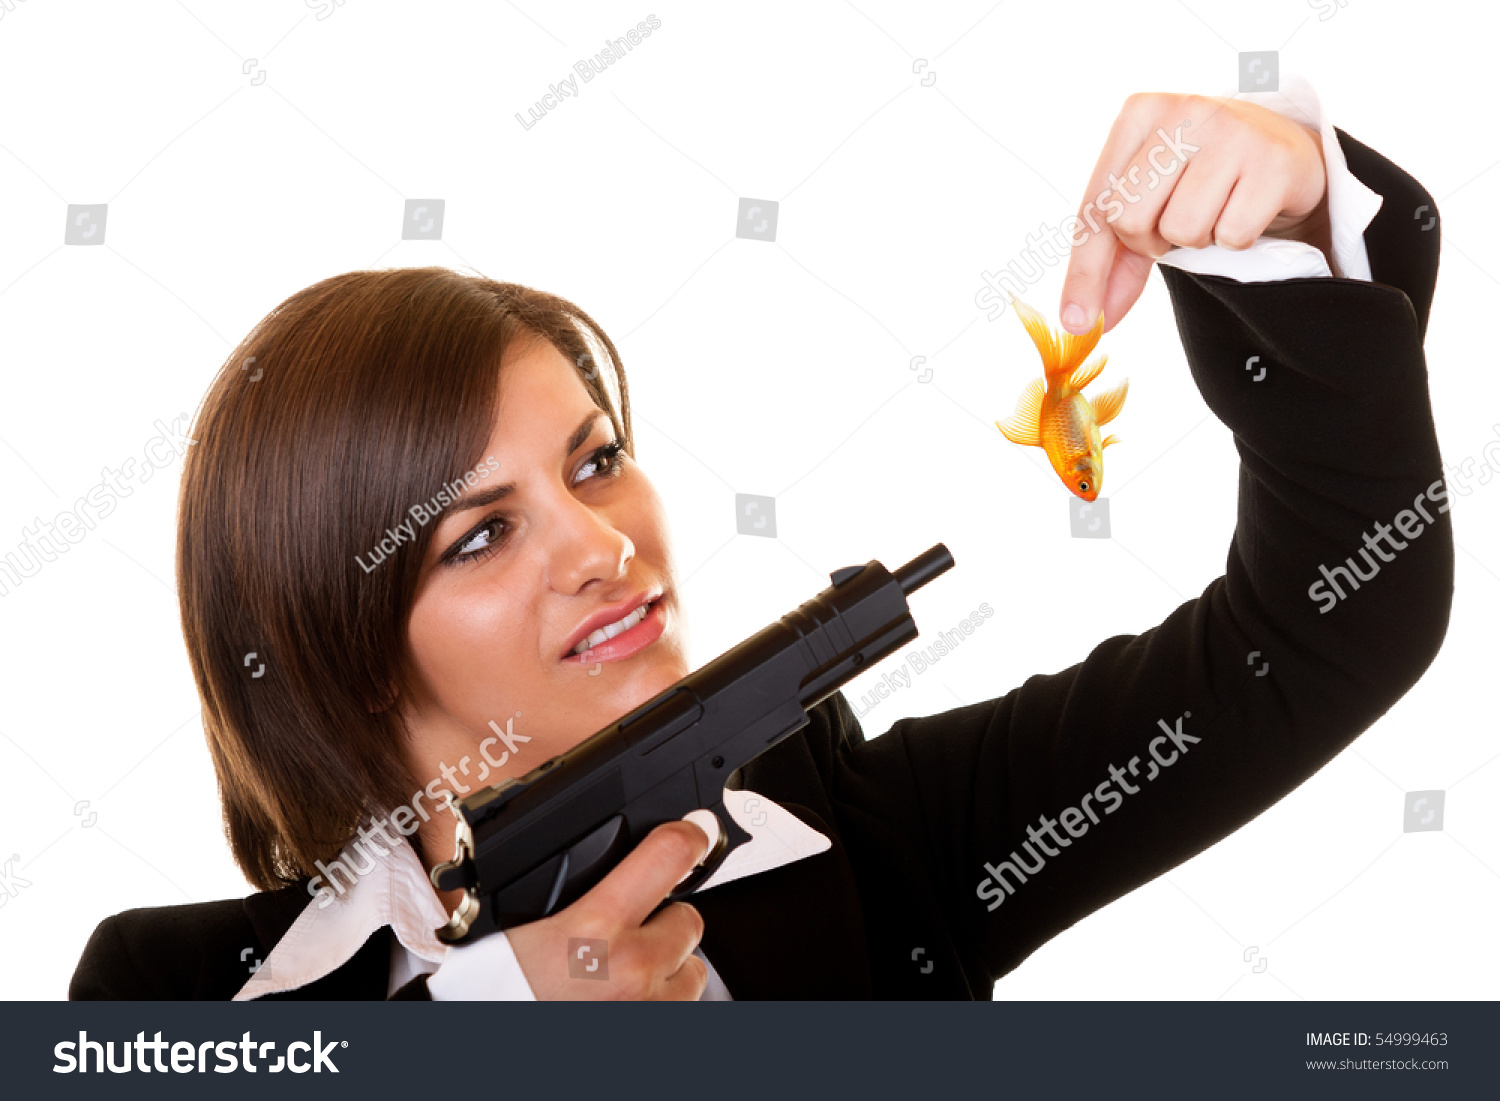 stock-photo-young-attractive-dangerous-woman-holding-one-gold-fish-54999463.jpg